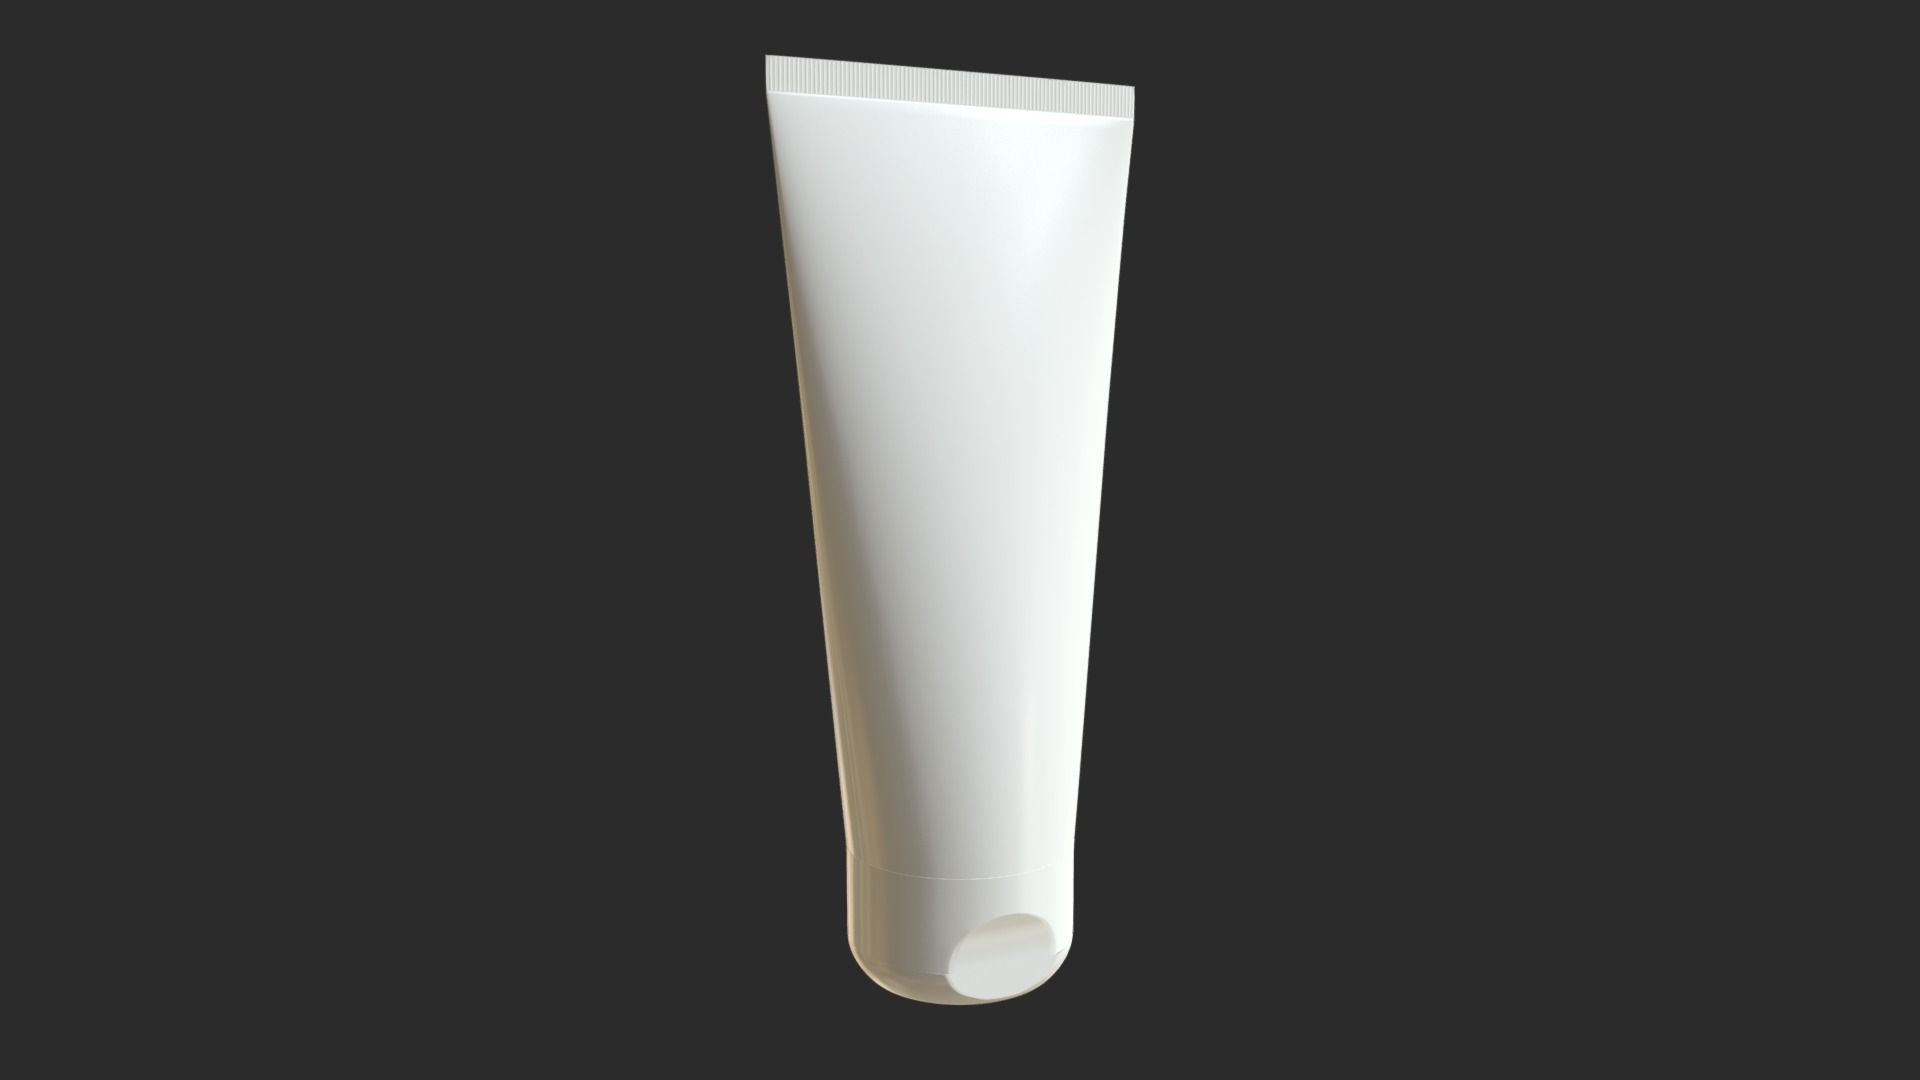 3D model Cosmetic tube 1 - This is a 3D model of the Cosmetic tube 1. The 3D model is about a white cylindrical object.